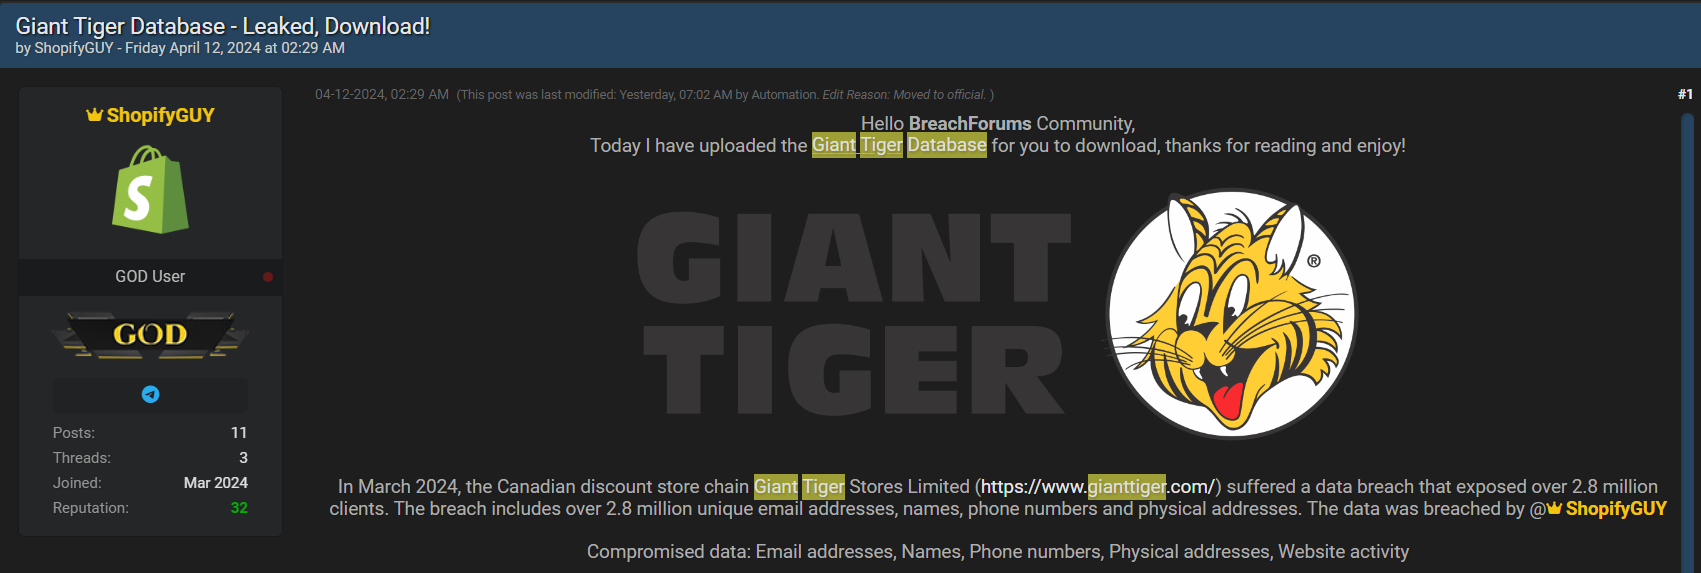 Giant Tiger Retail Hack Exposes 2.8M Customer Records, No Financial Data Leaked